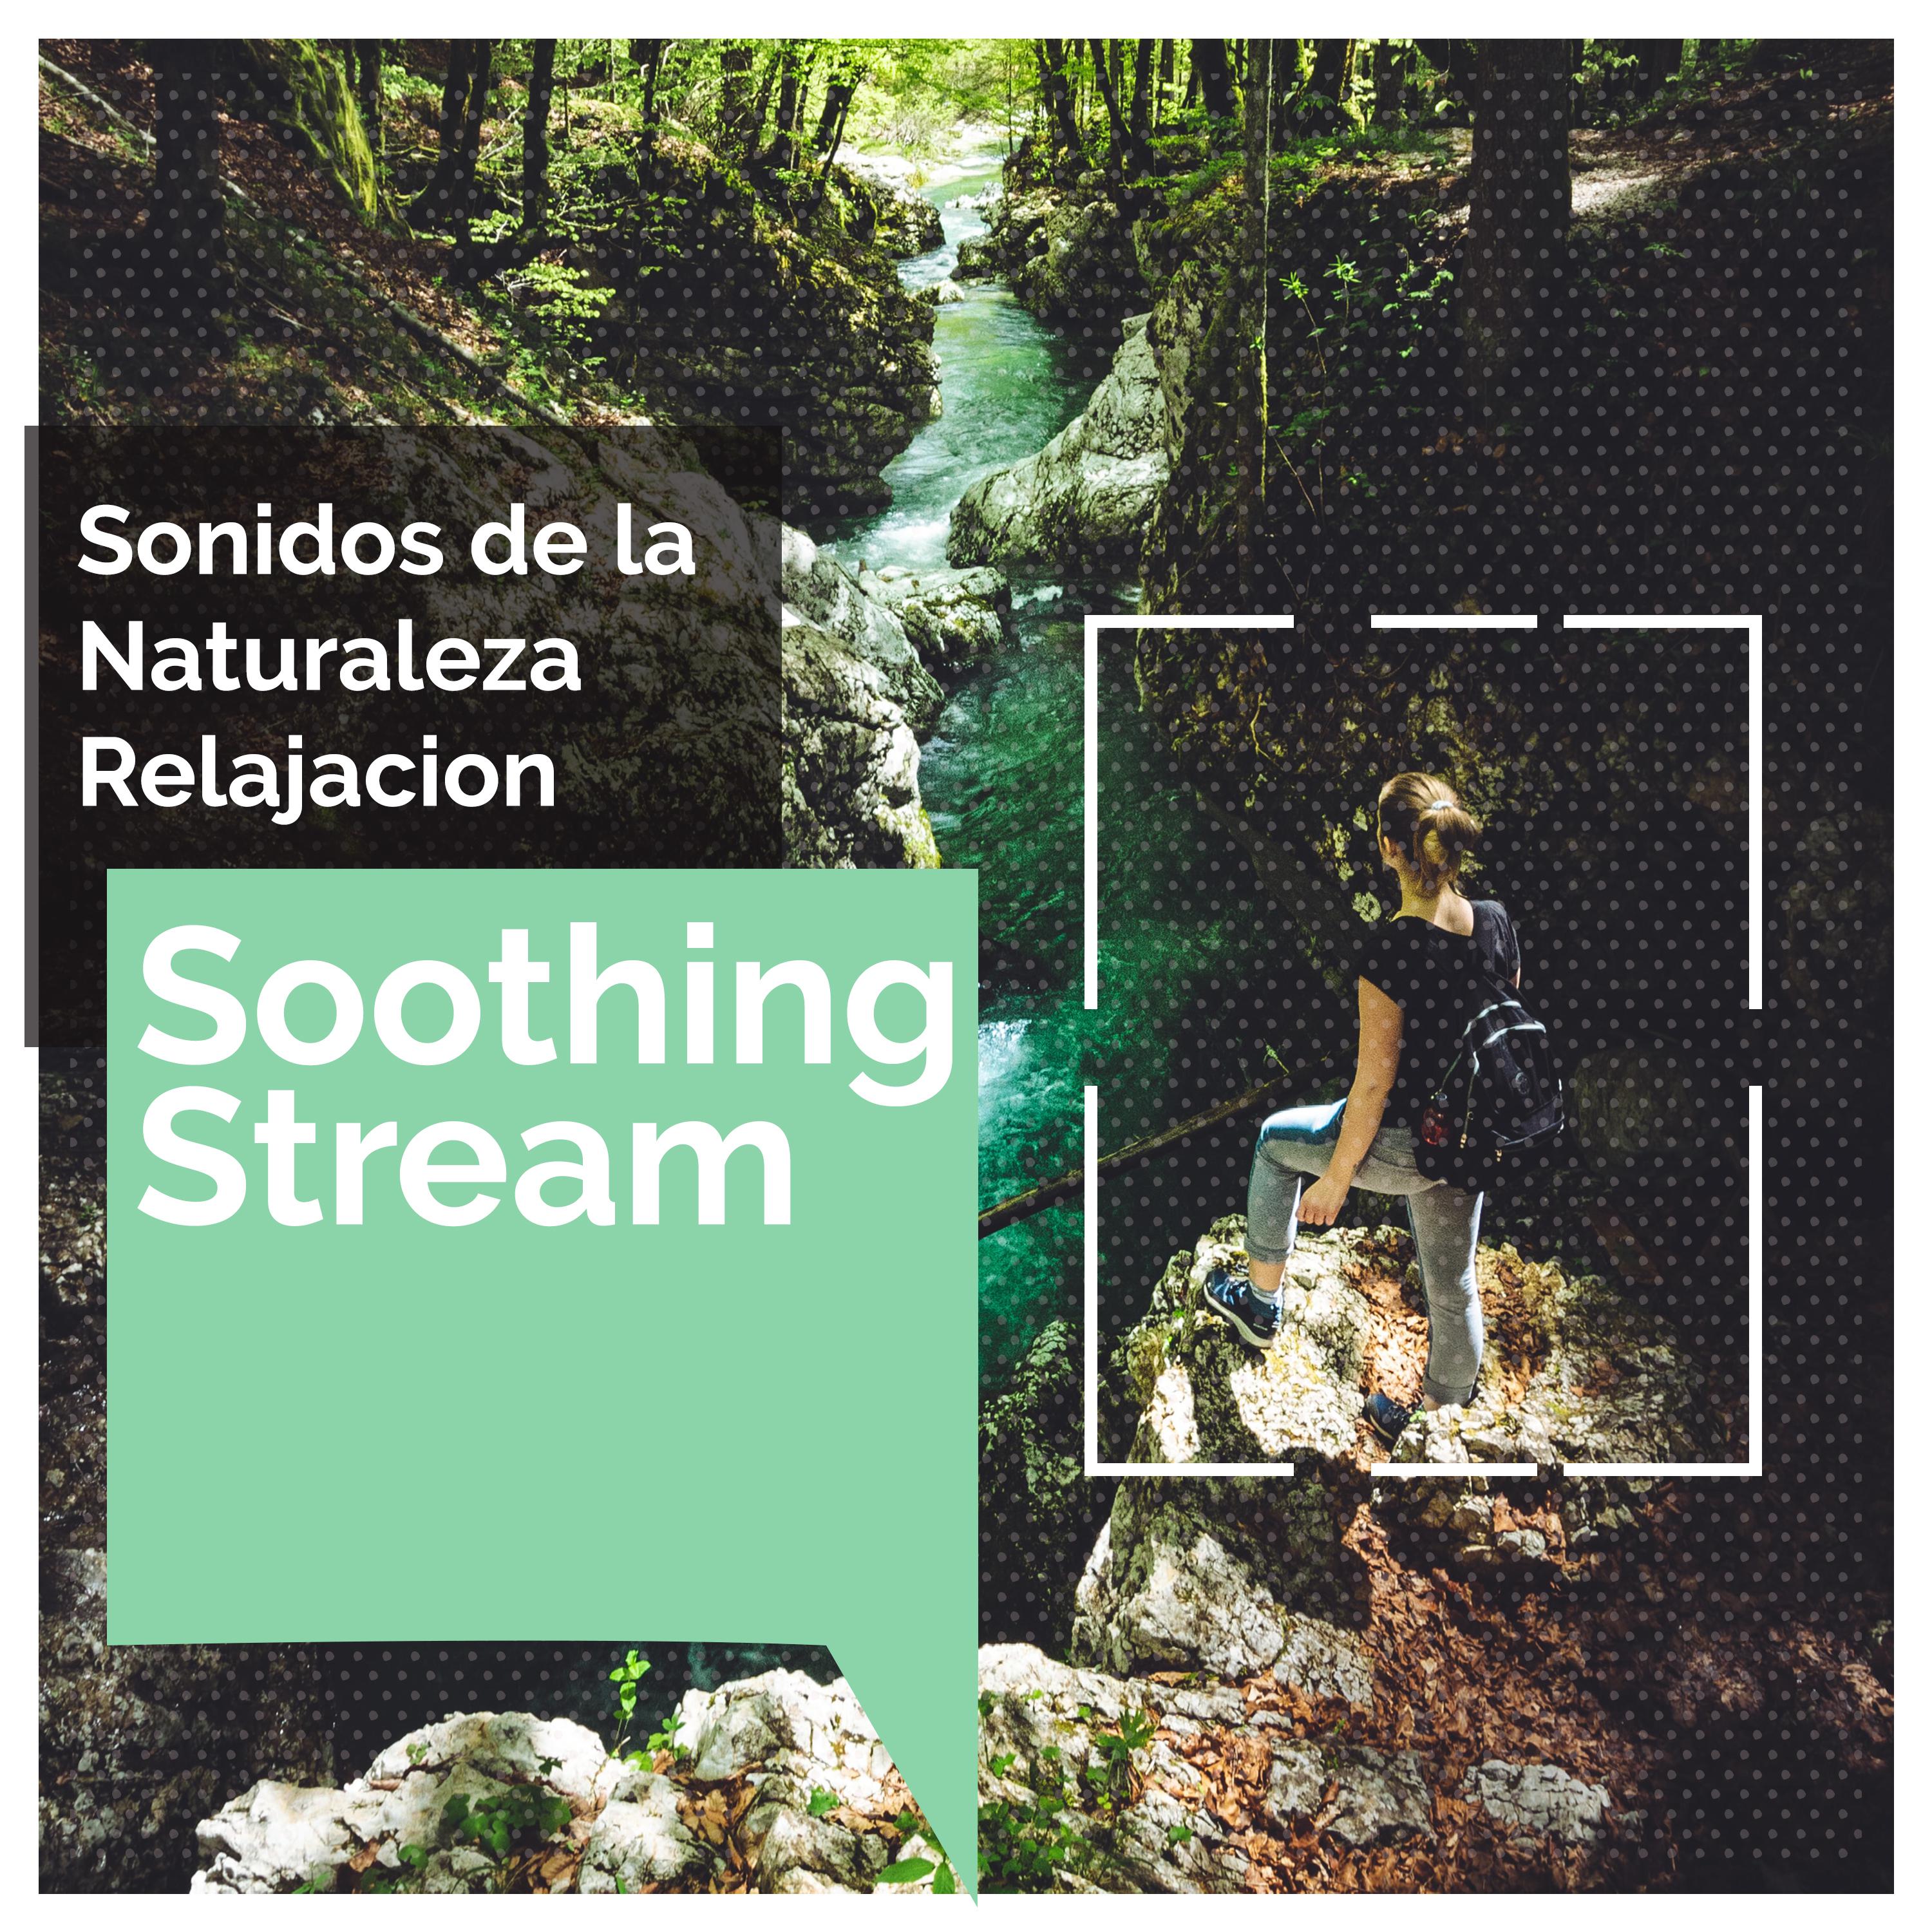 Soothing Stream